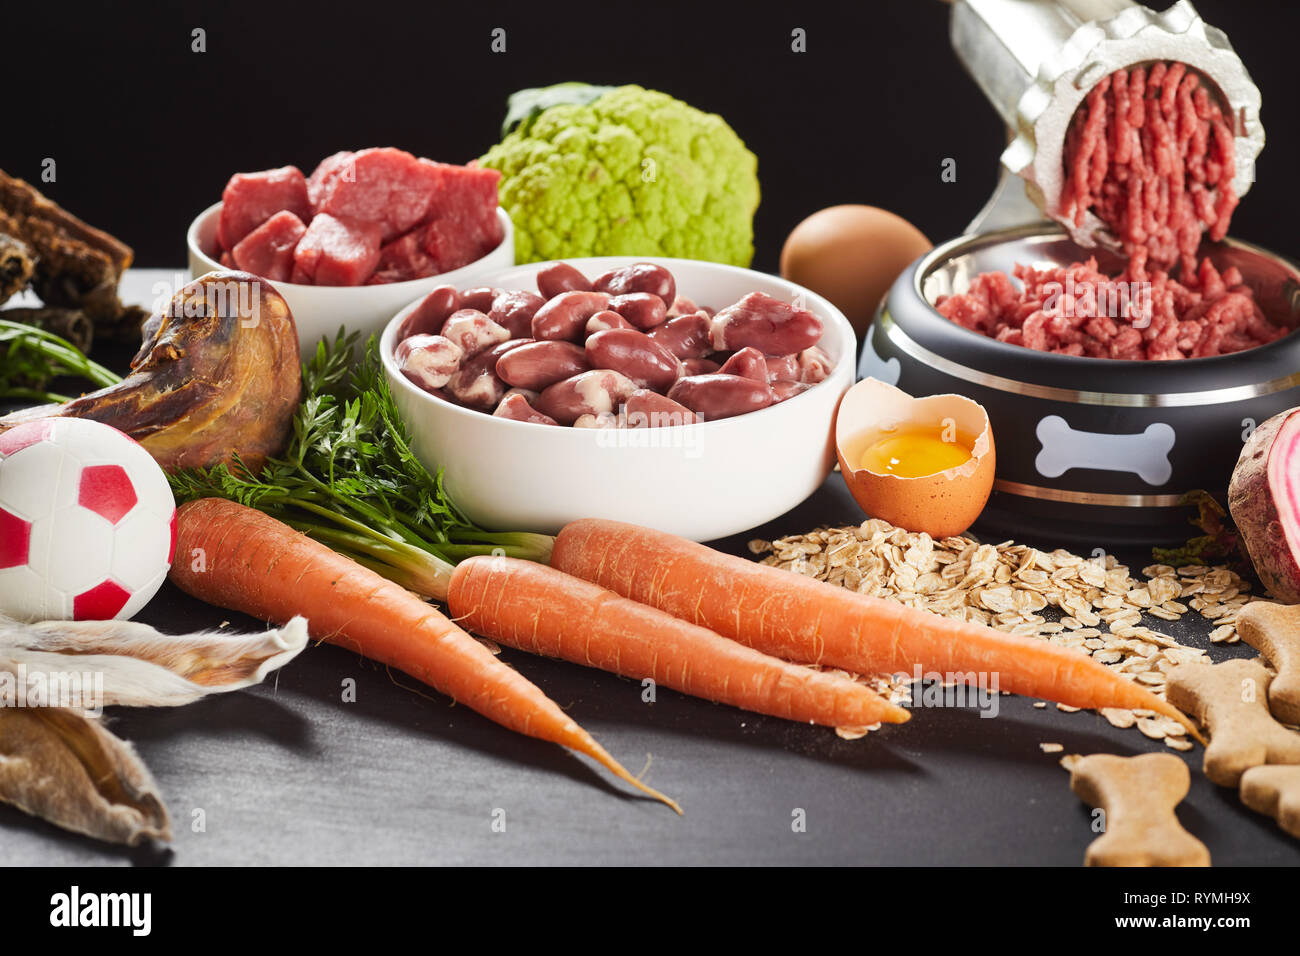 https://c8.alamy.com/comp/RYMH9X/preparing-raw-barf-food-for-a-pet-dog-or-cat-mincing-offal-beef-organs-and-poultry-with-assorted-vegetables-oats-and-egg-yolks-to-serve-with-biscuit-RYMH9X.jpg